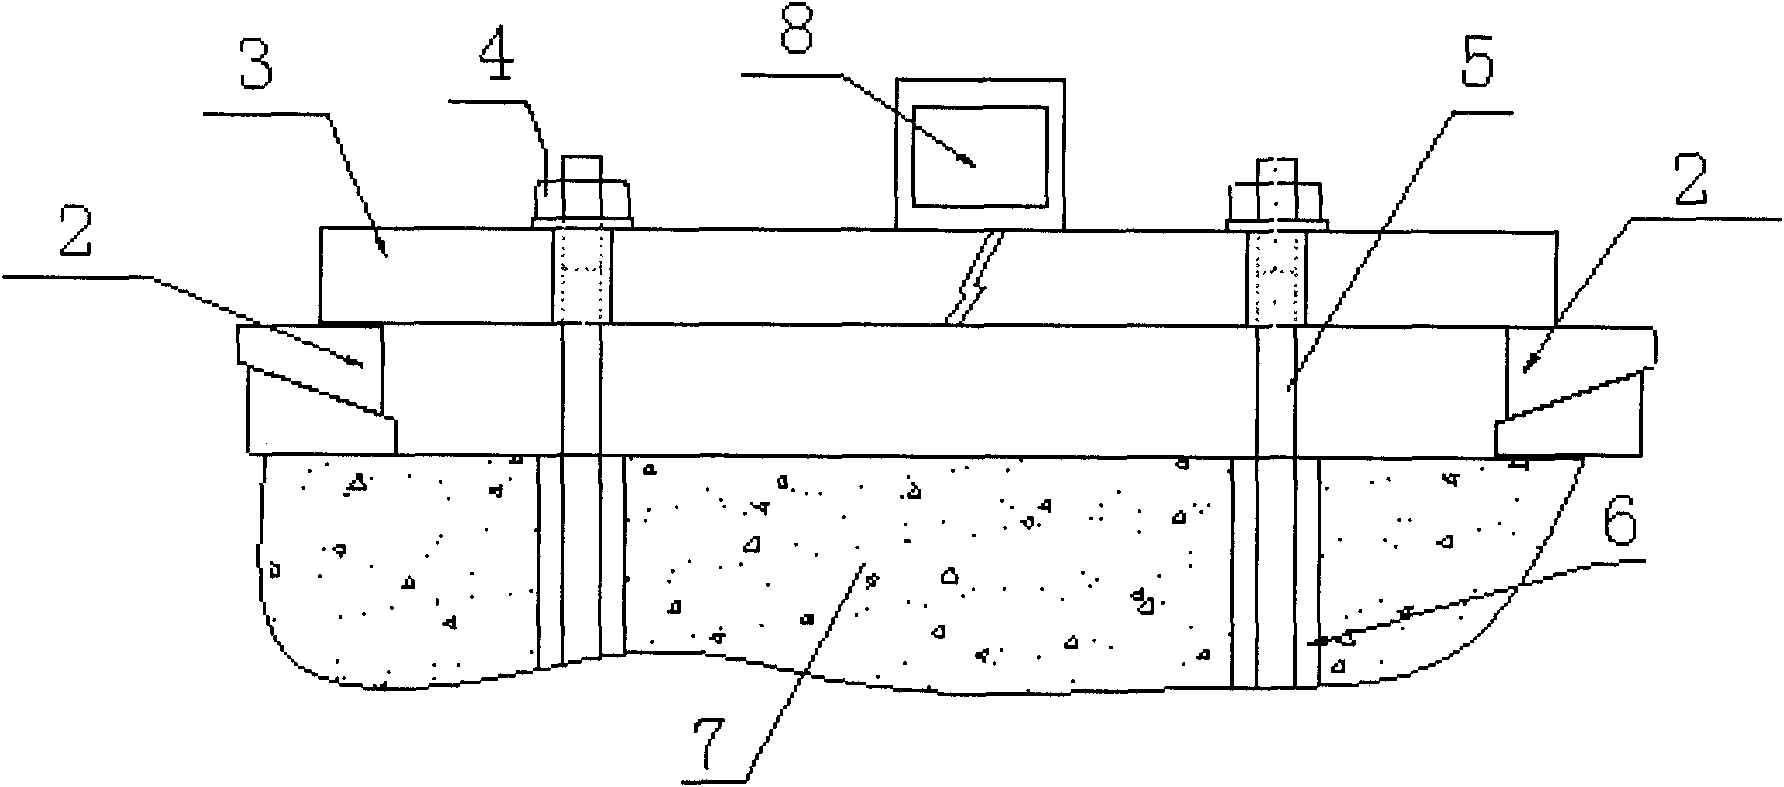 Mounting construction method of liner plates during mounting large-scale precision equipment